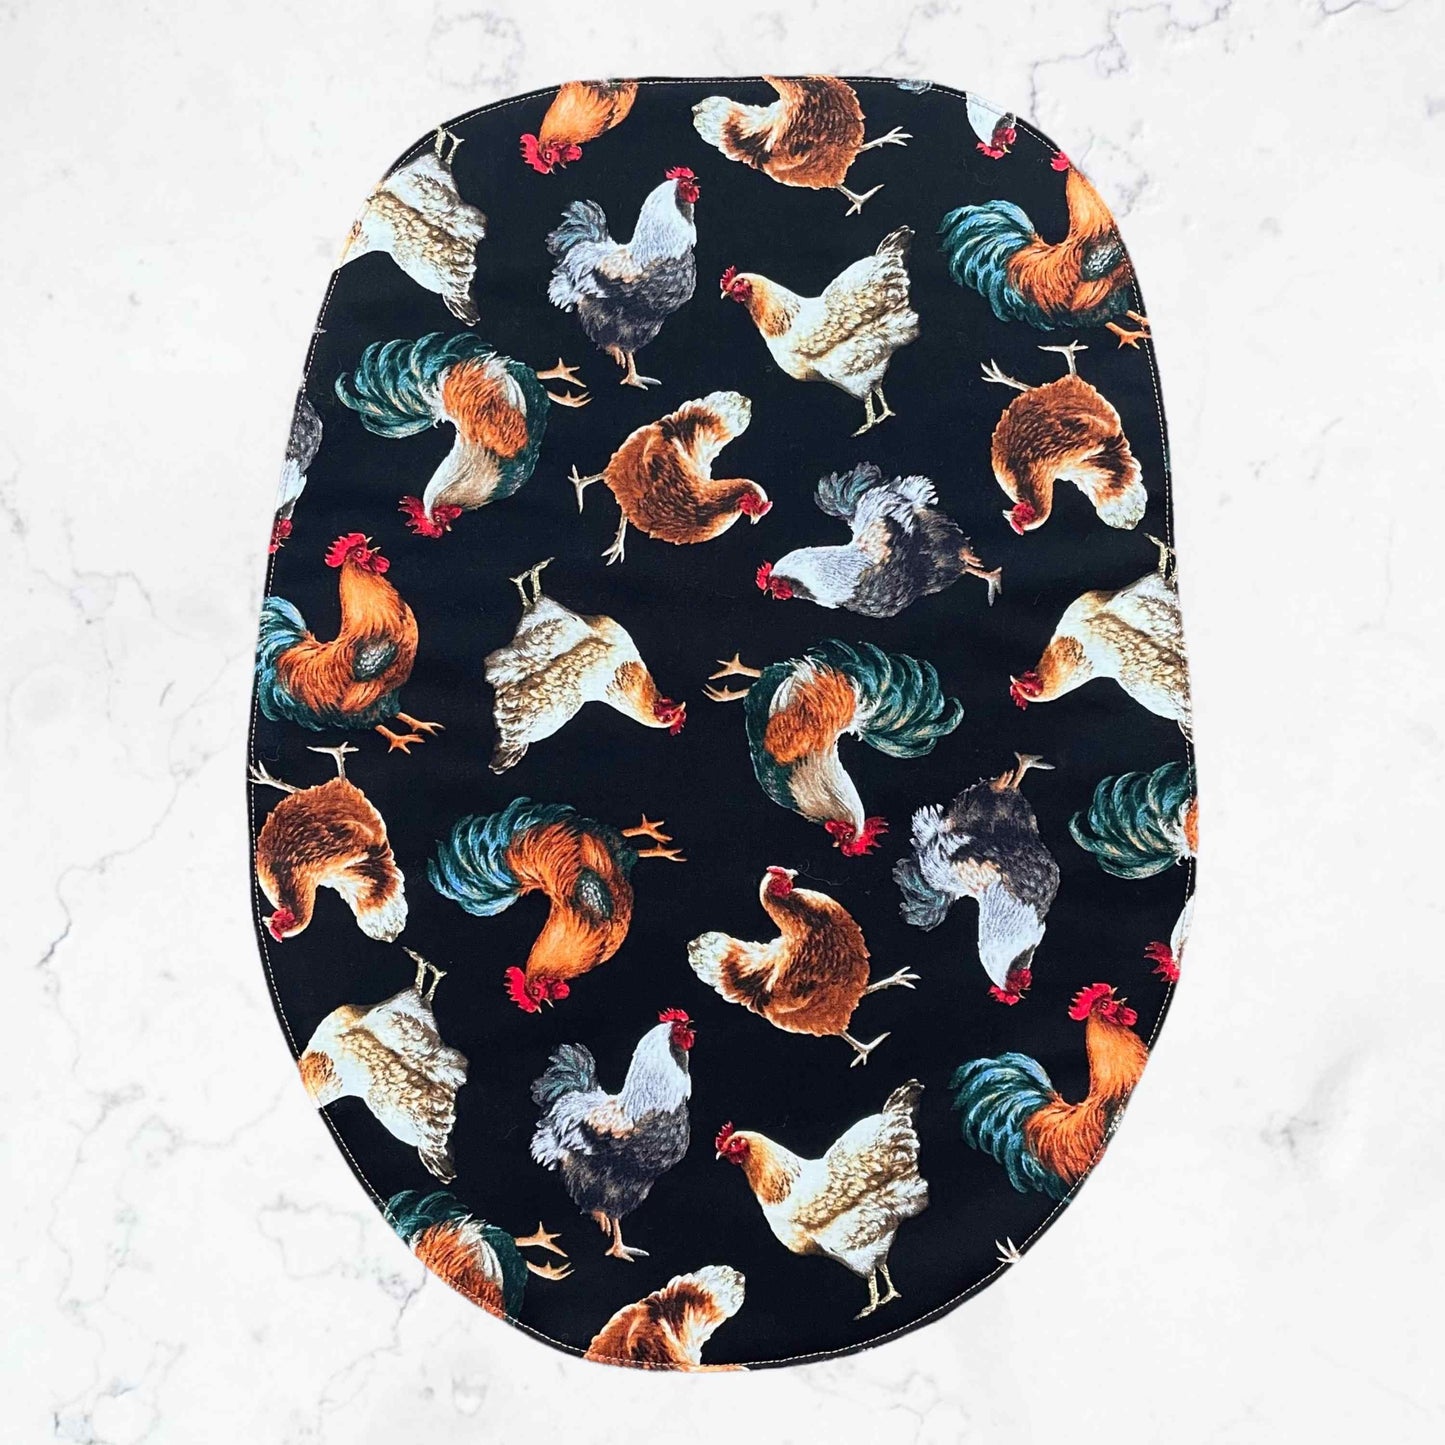 Stand Mixer Slider Mat - Roosters and Chickens